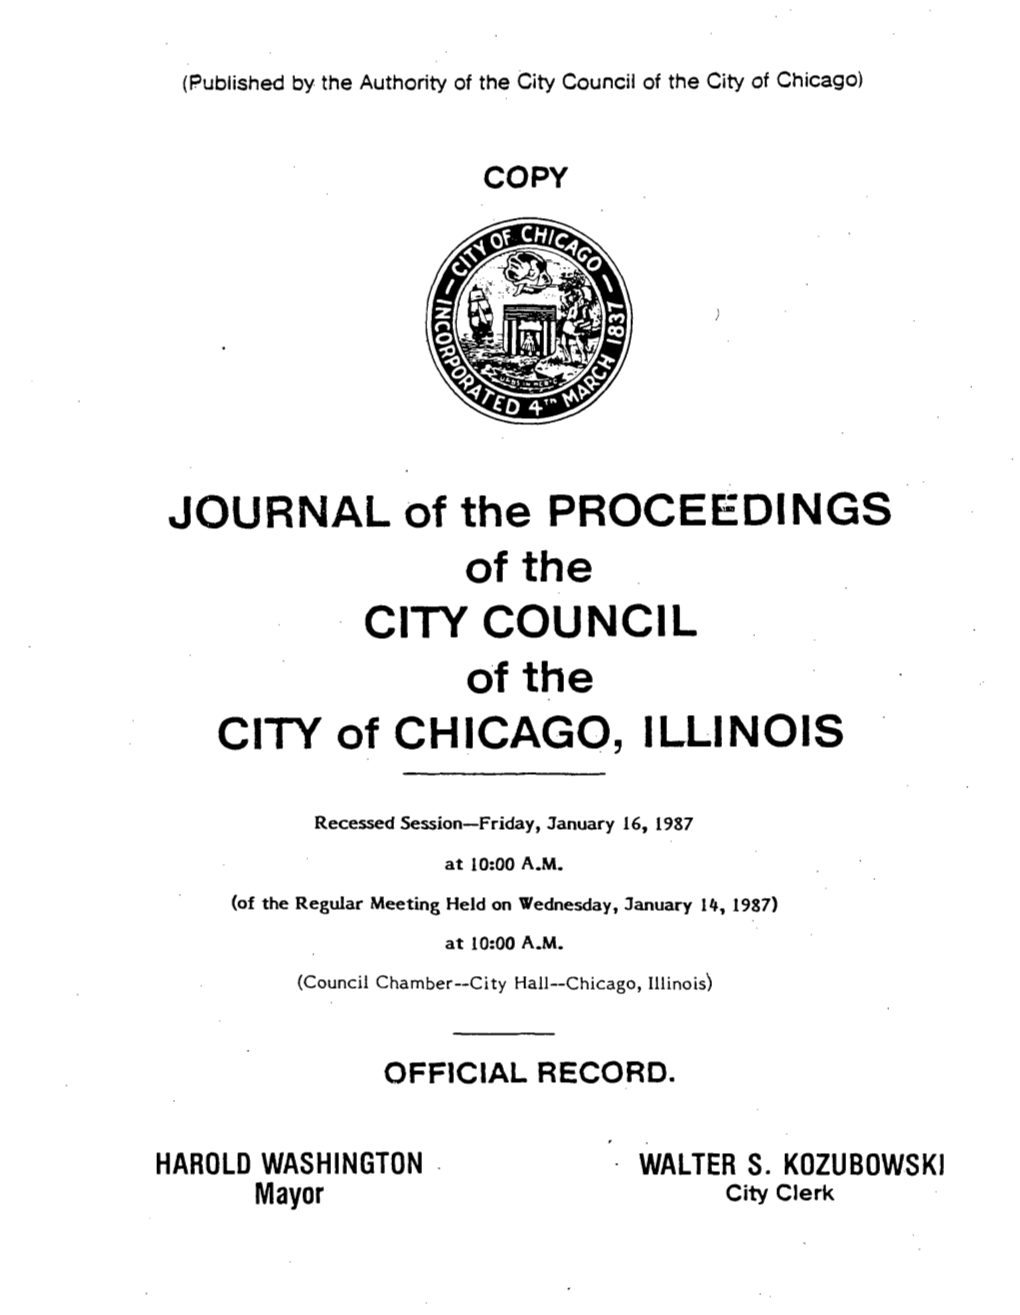 JOURNAL of the PROCEEDINGS of the CITY COUNCIL Ofthe CITY of CHICAGO, ILLINOIS